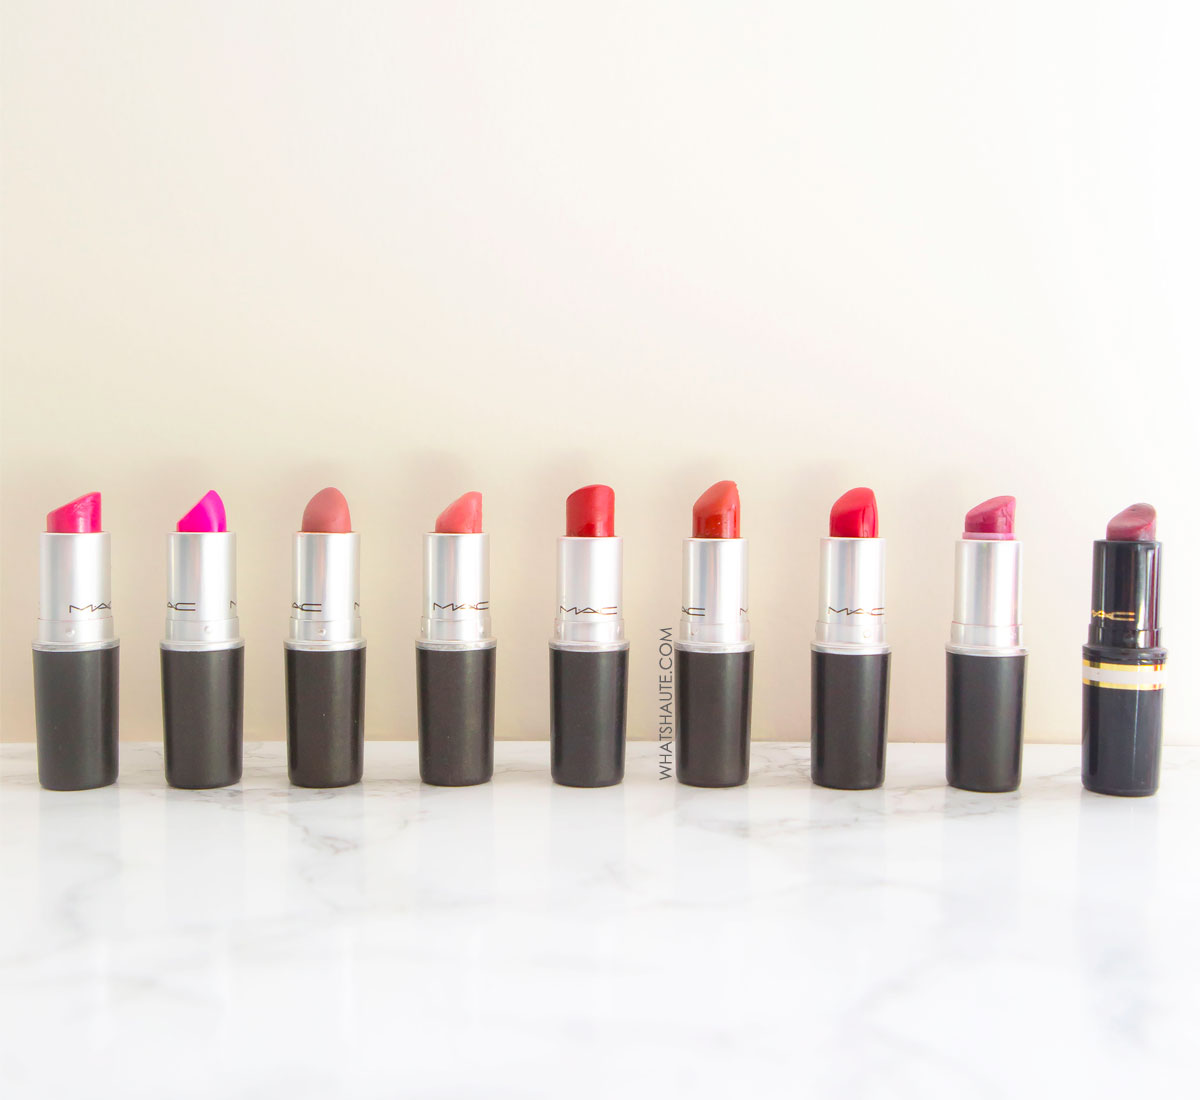 9 Must-have MAC lipsticks: Heaux, RiRi Woo, Lickable, Fanfare, Crème in Your Coffee, Chili, Candy Yum Yum, Dark Deed, Russian Red